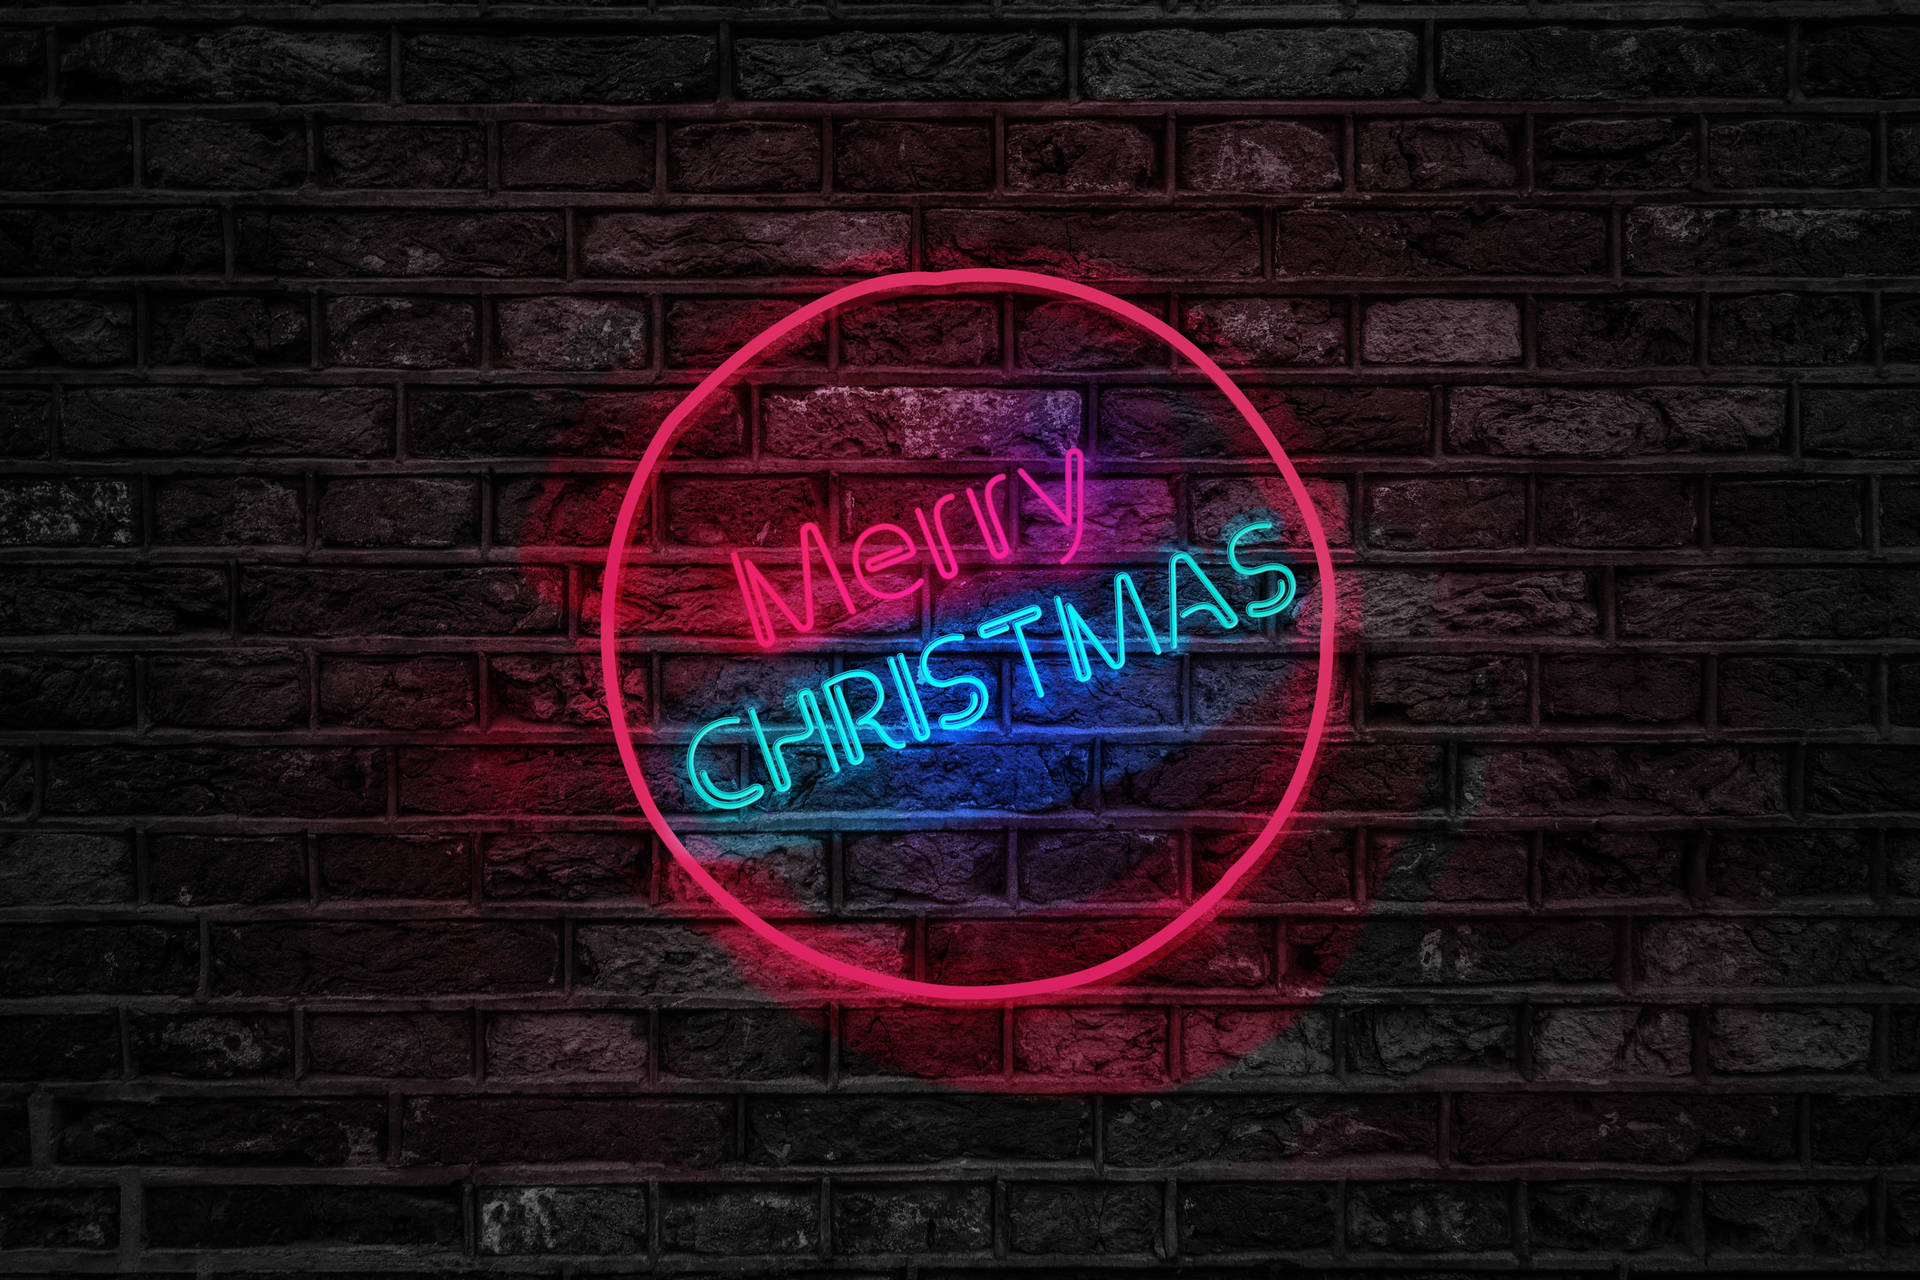 Merry Christmas led sign in neon pink and blue wallpaper.